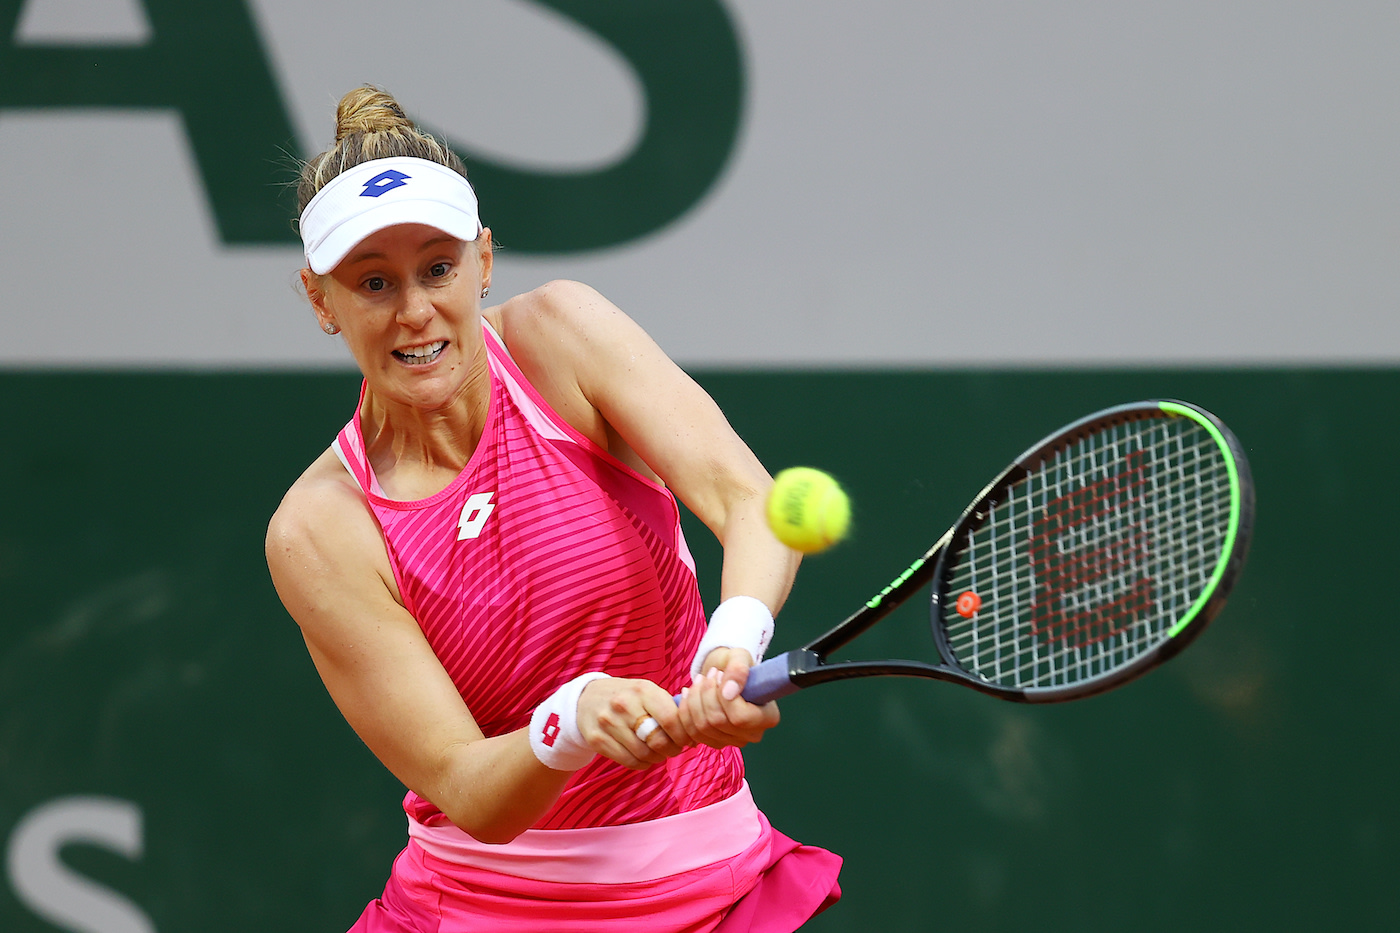 Riske admits time off hurt her on court in 2020 | Tennis.com